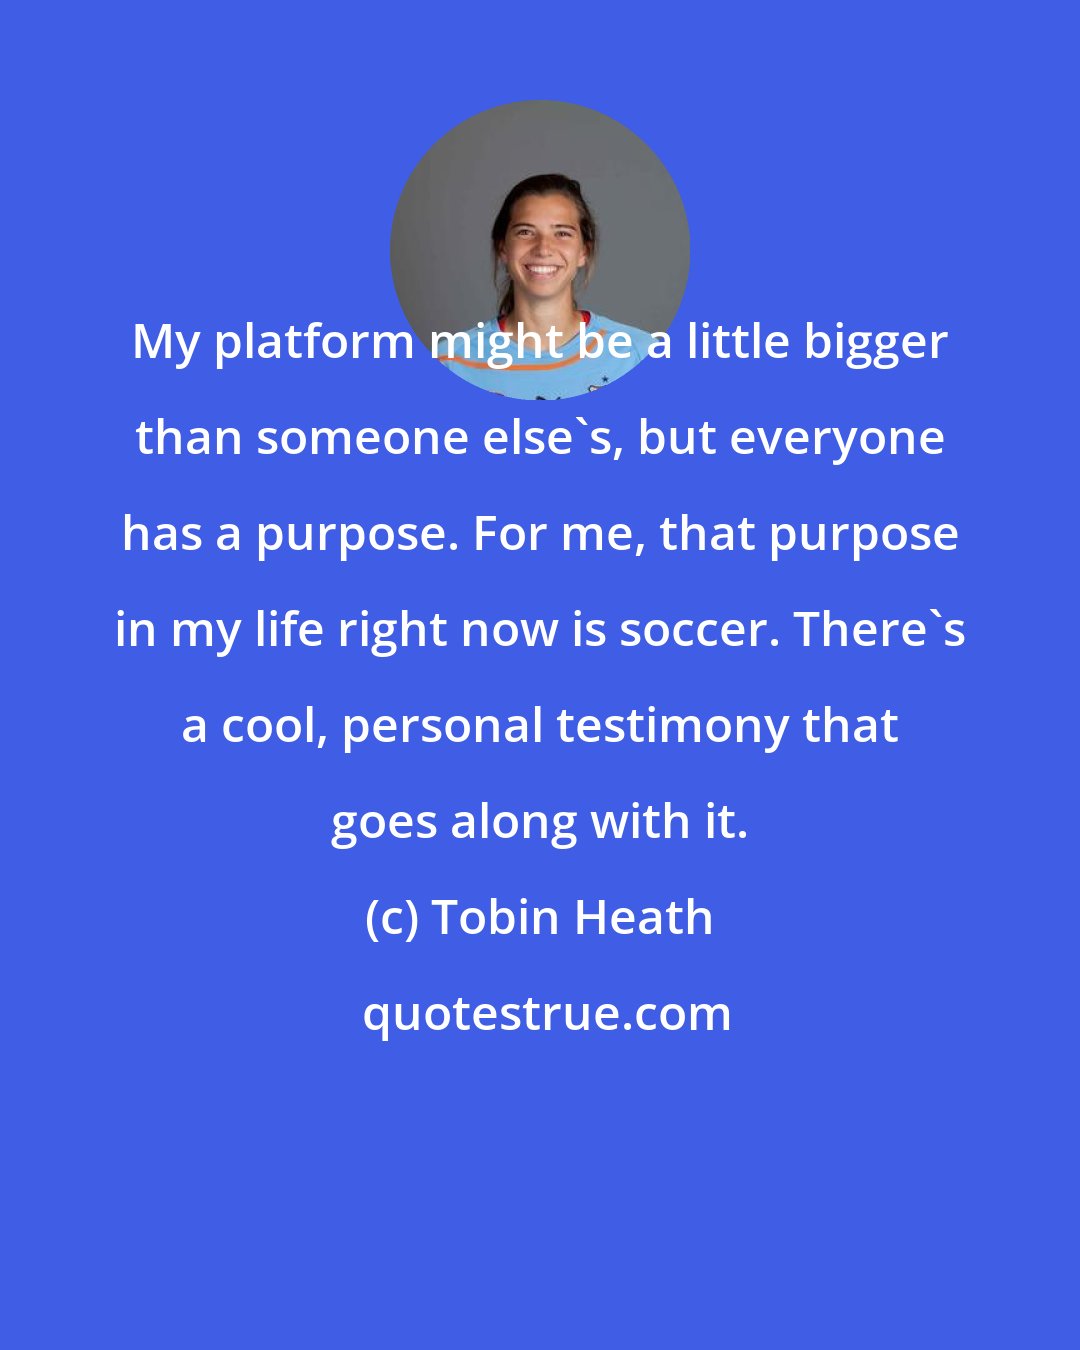 Tobin Heath: My platform might be a little bigger than someone else's, but everyone has a purpose. For me, that purpose in my life right now is soccer. There's a cool, personal testimony that goes along with it.